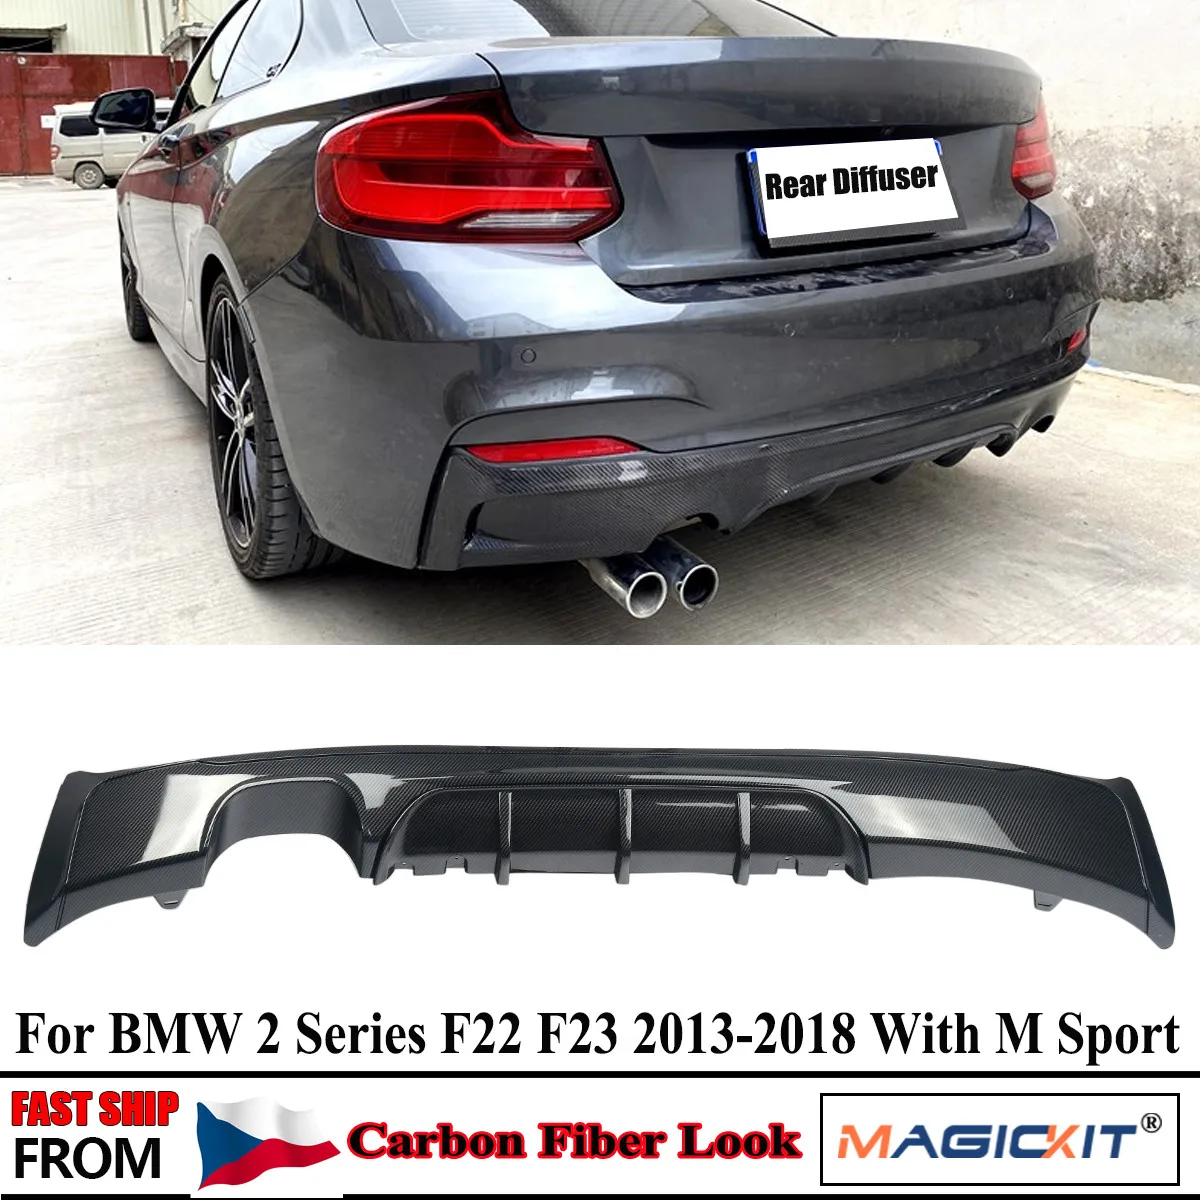 

MagicKit For BMW 2 Series F22 F23 M Sport Performance Coupe Rear Diffuser Carbon Look 14+